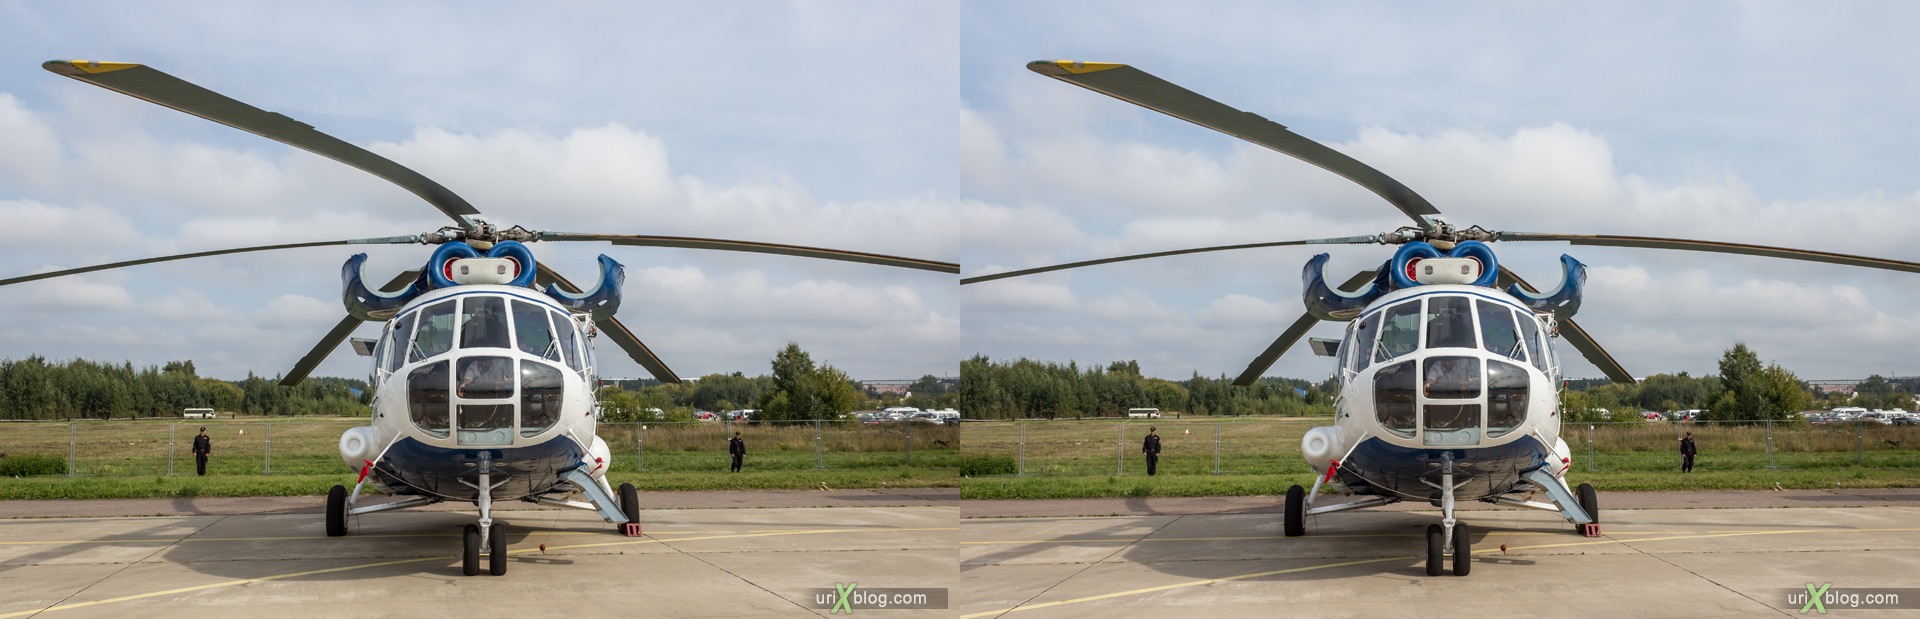 2013, MAKS, International Aviation and Space Salon, Russia, Ramenskoye airfield, Mi-8MSB, helicopter, 3D, stereo pair, cross-eyed, crossview, cross view stereo pair, stereoscopic